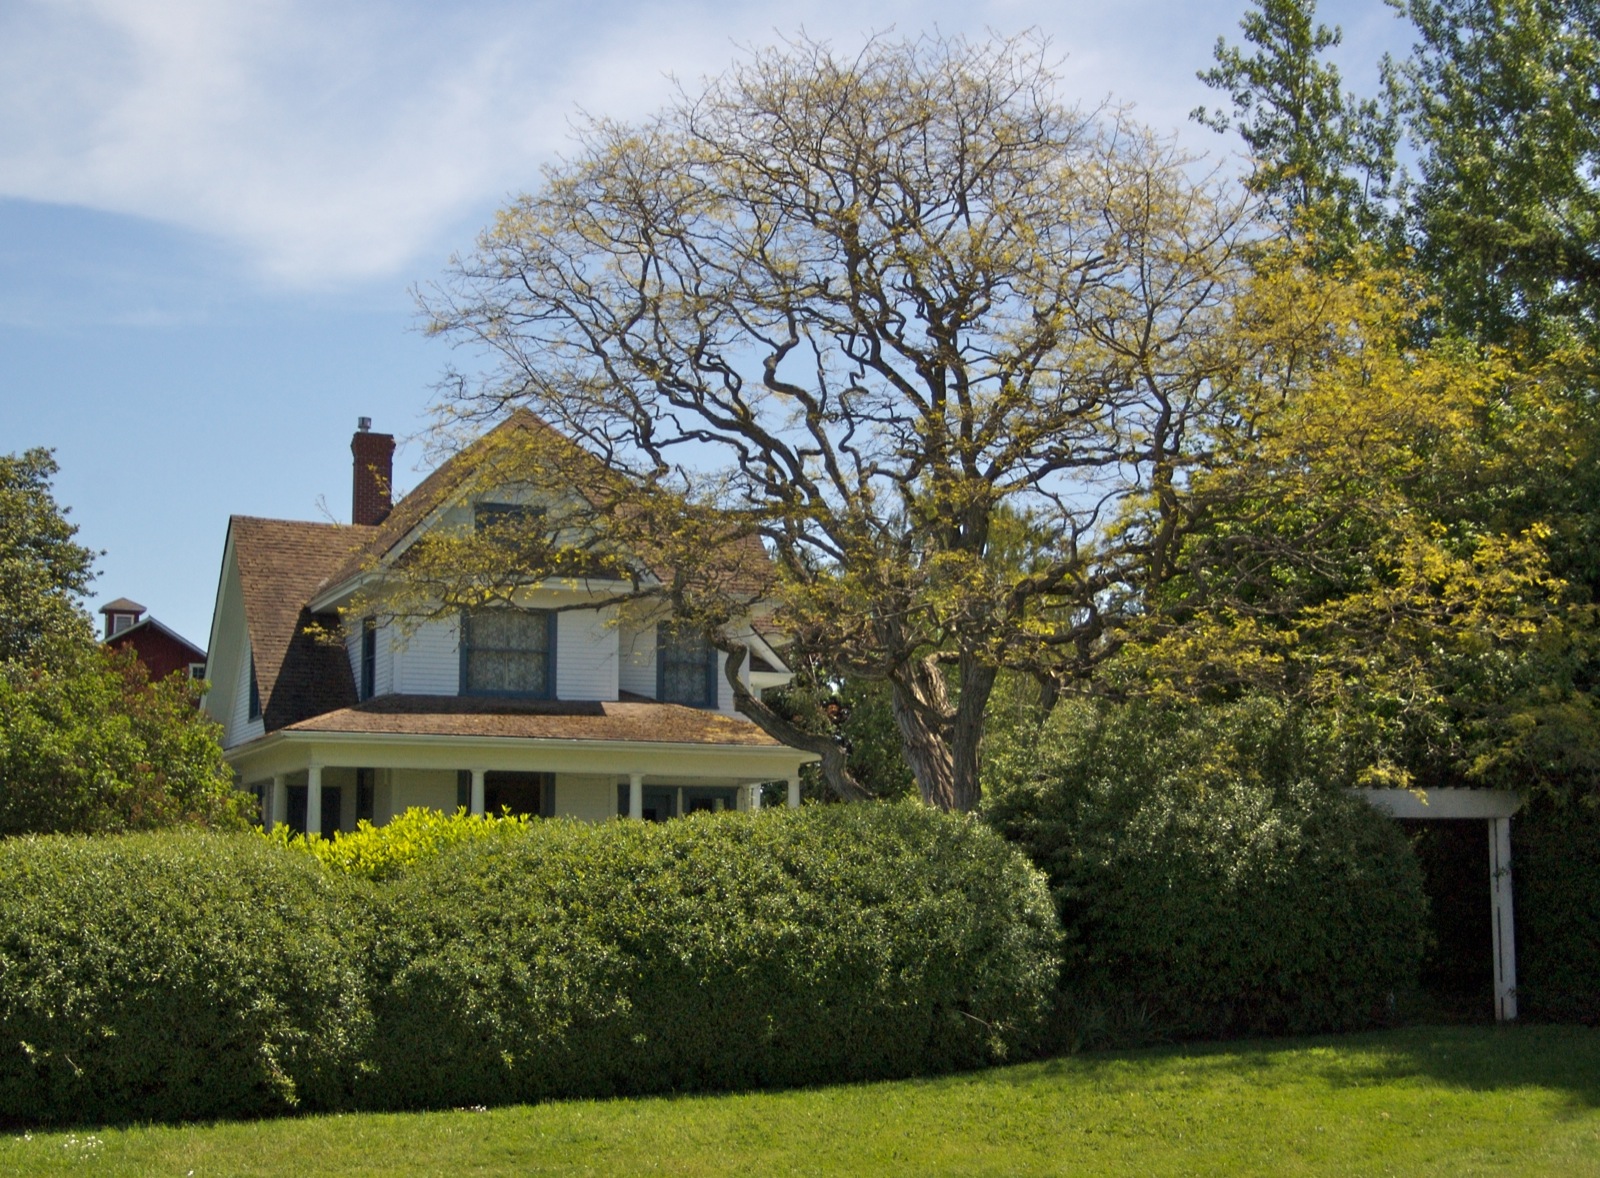 a house next to a hedged area and a tree